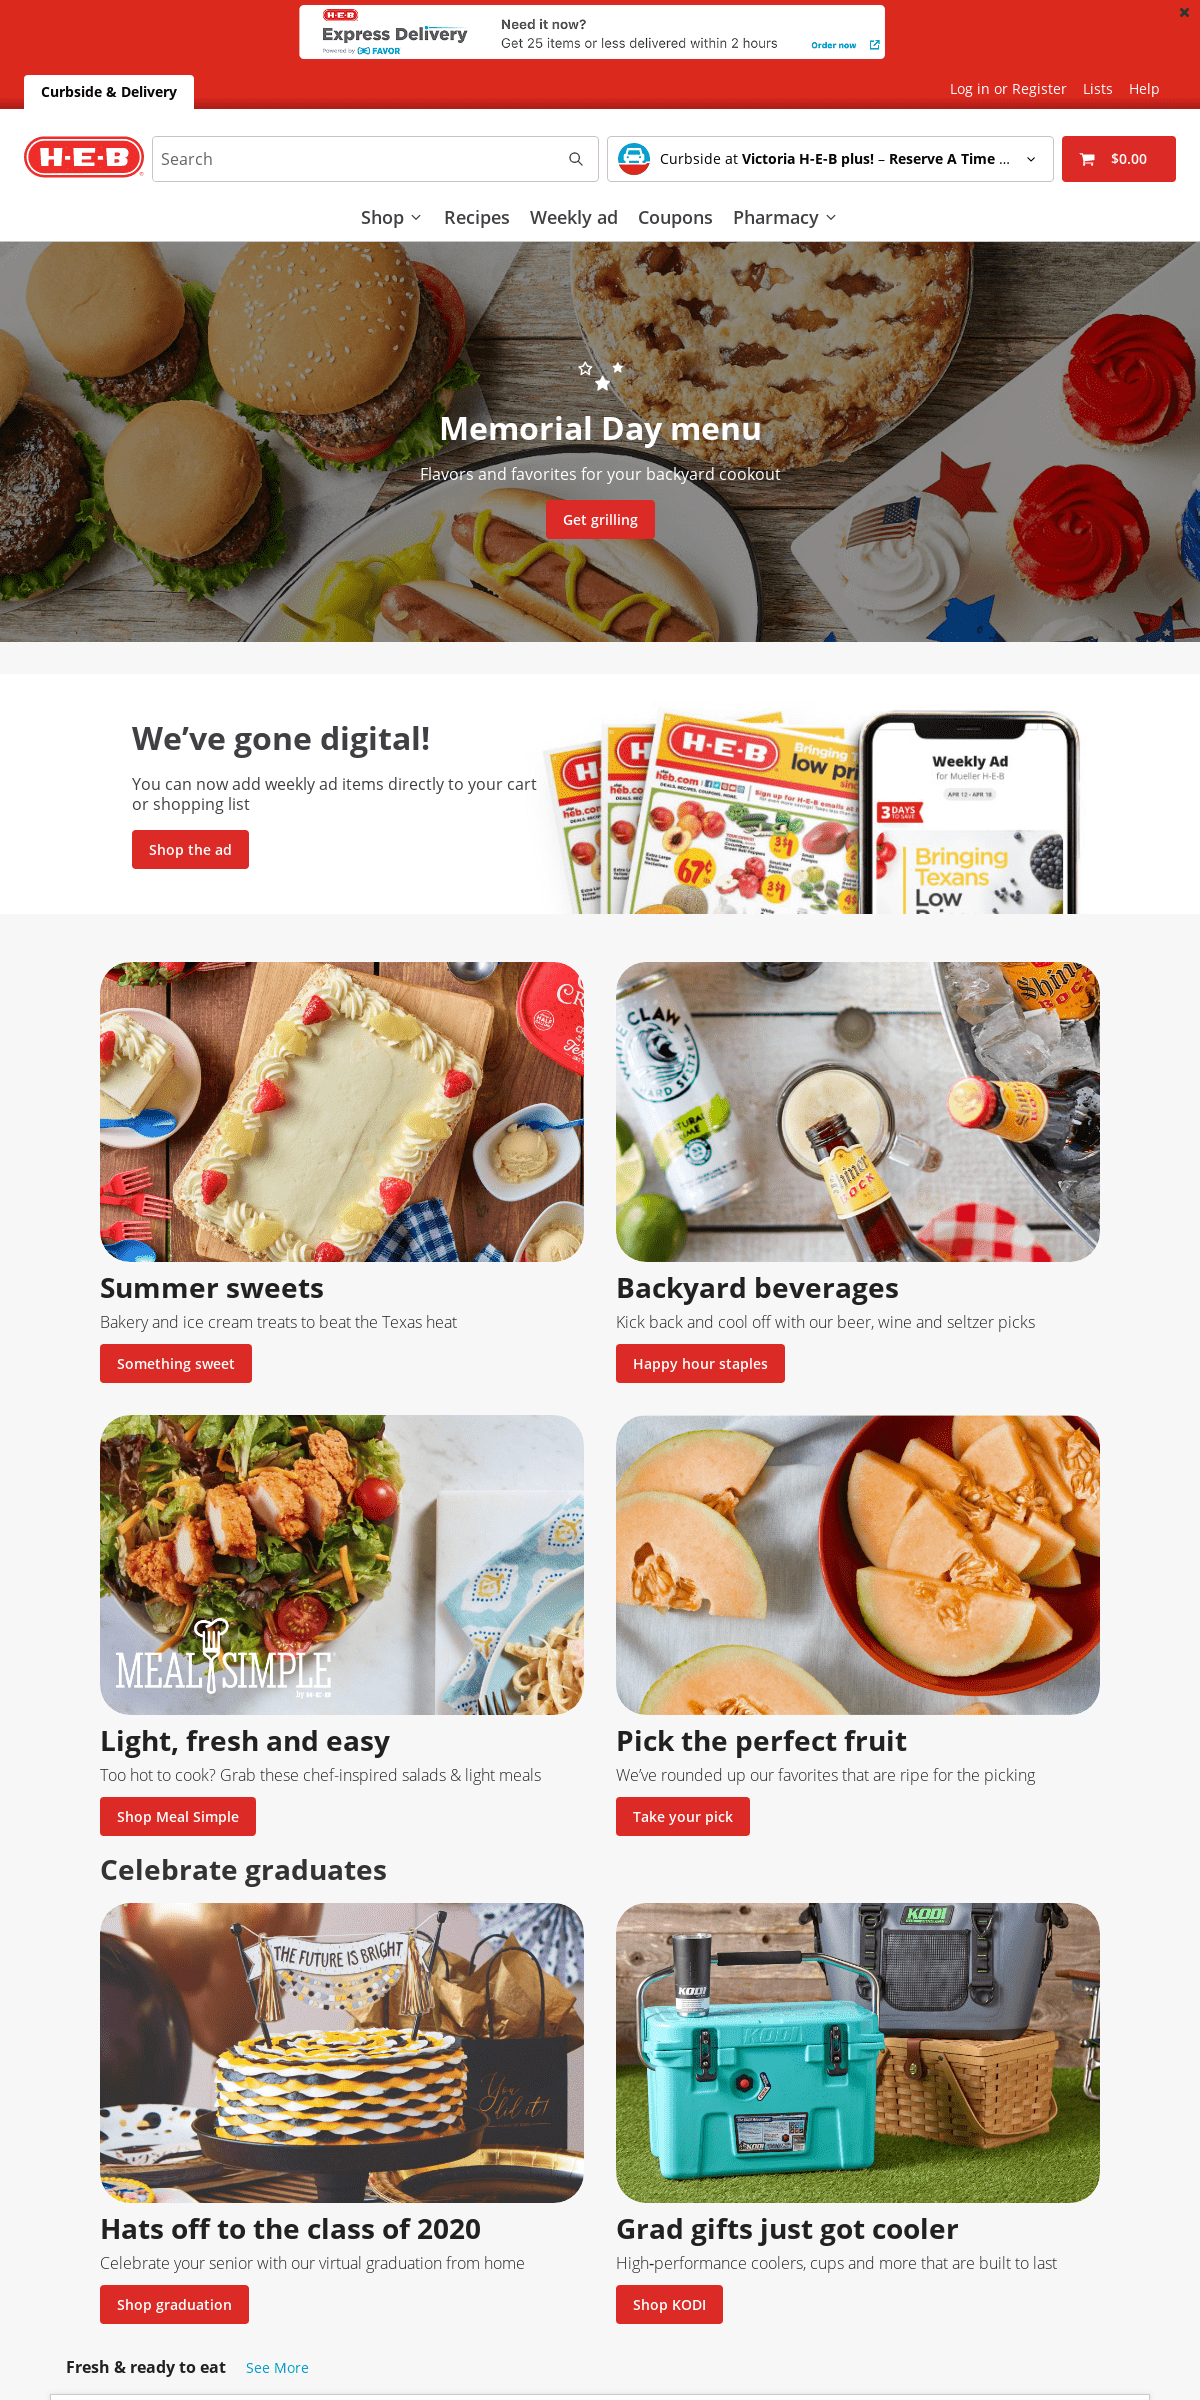 A complete backup of heb.com